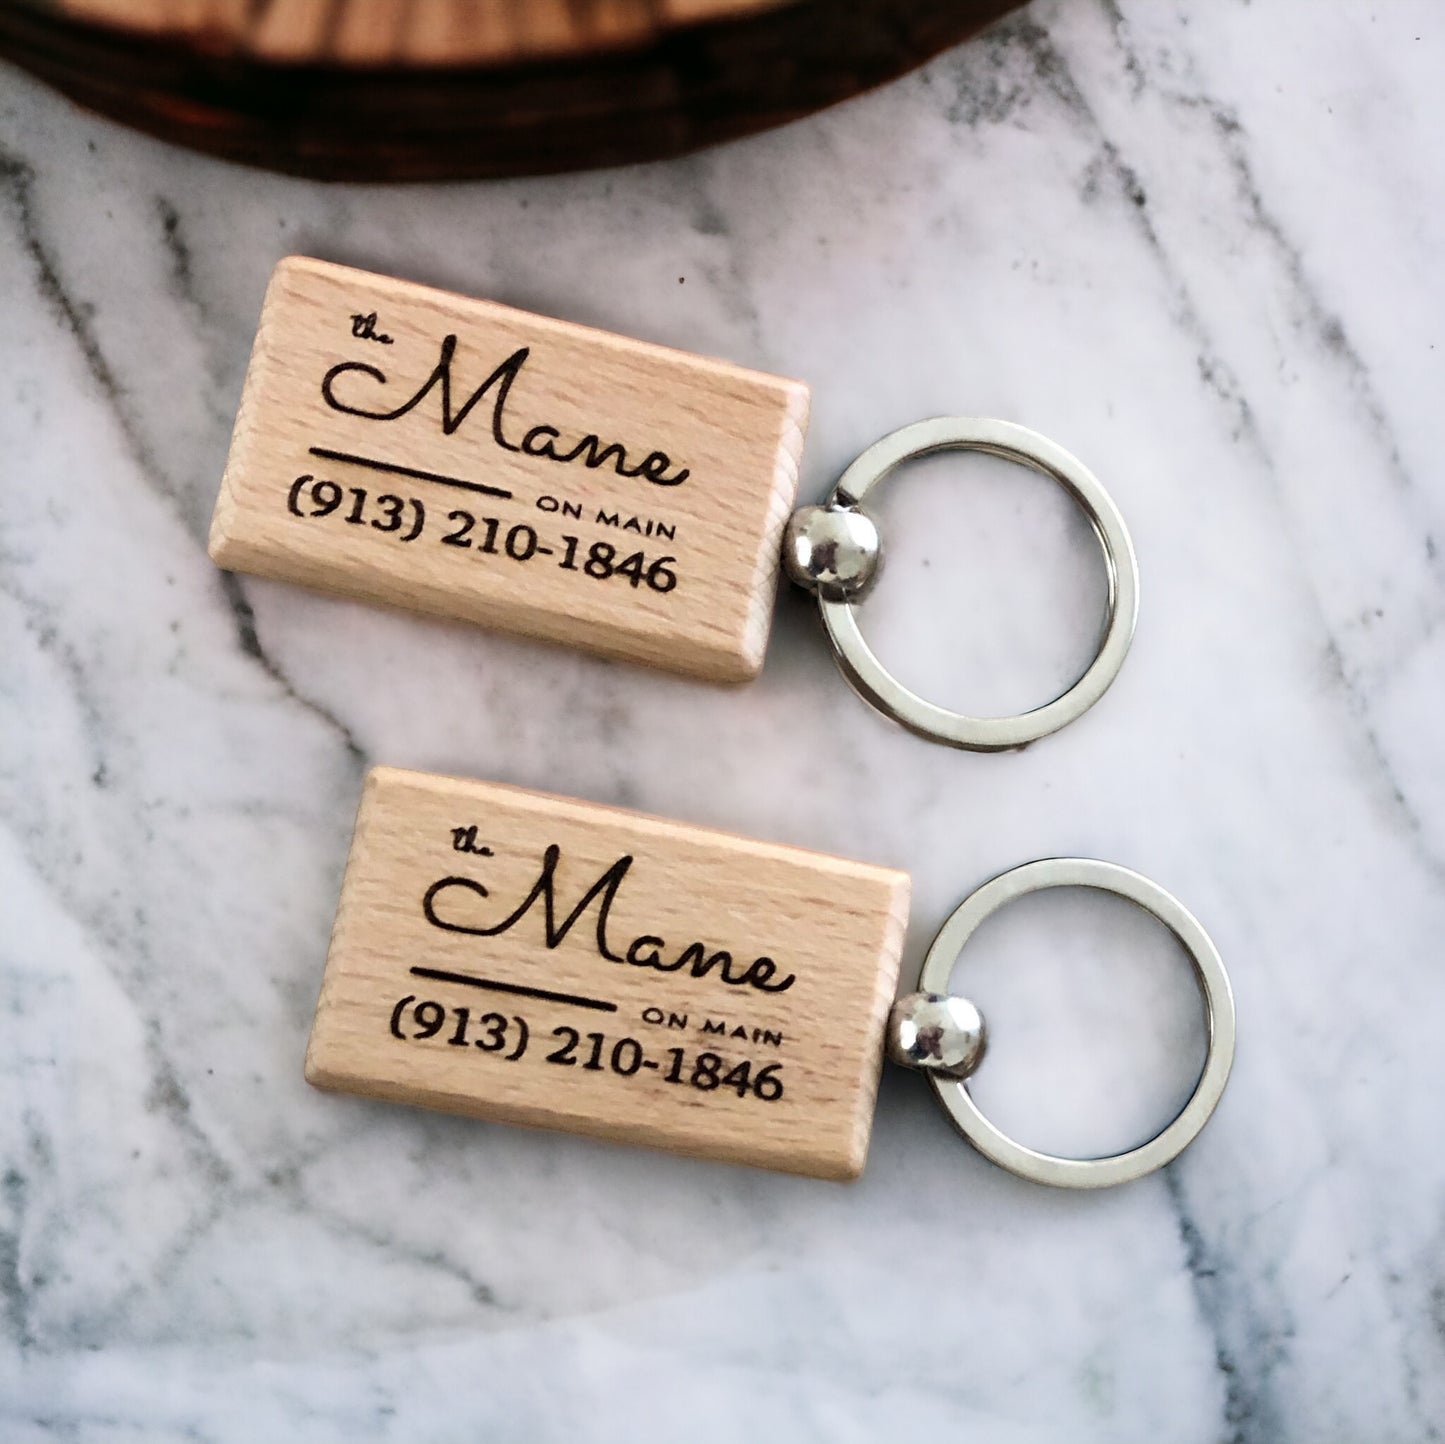 Custom Logo Engraved Wood Keychains - Rectangle, Circle or Square Shape Available - Bulk Discounts!